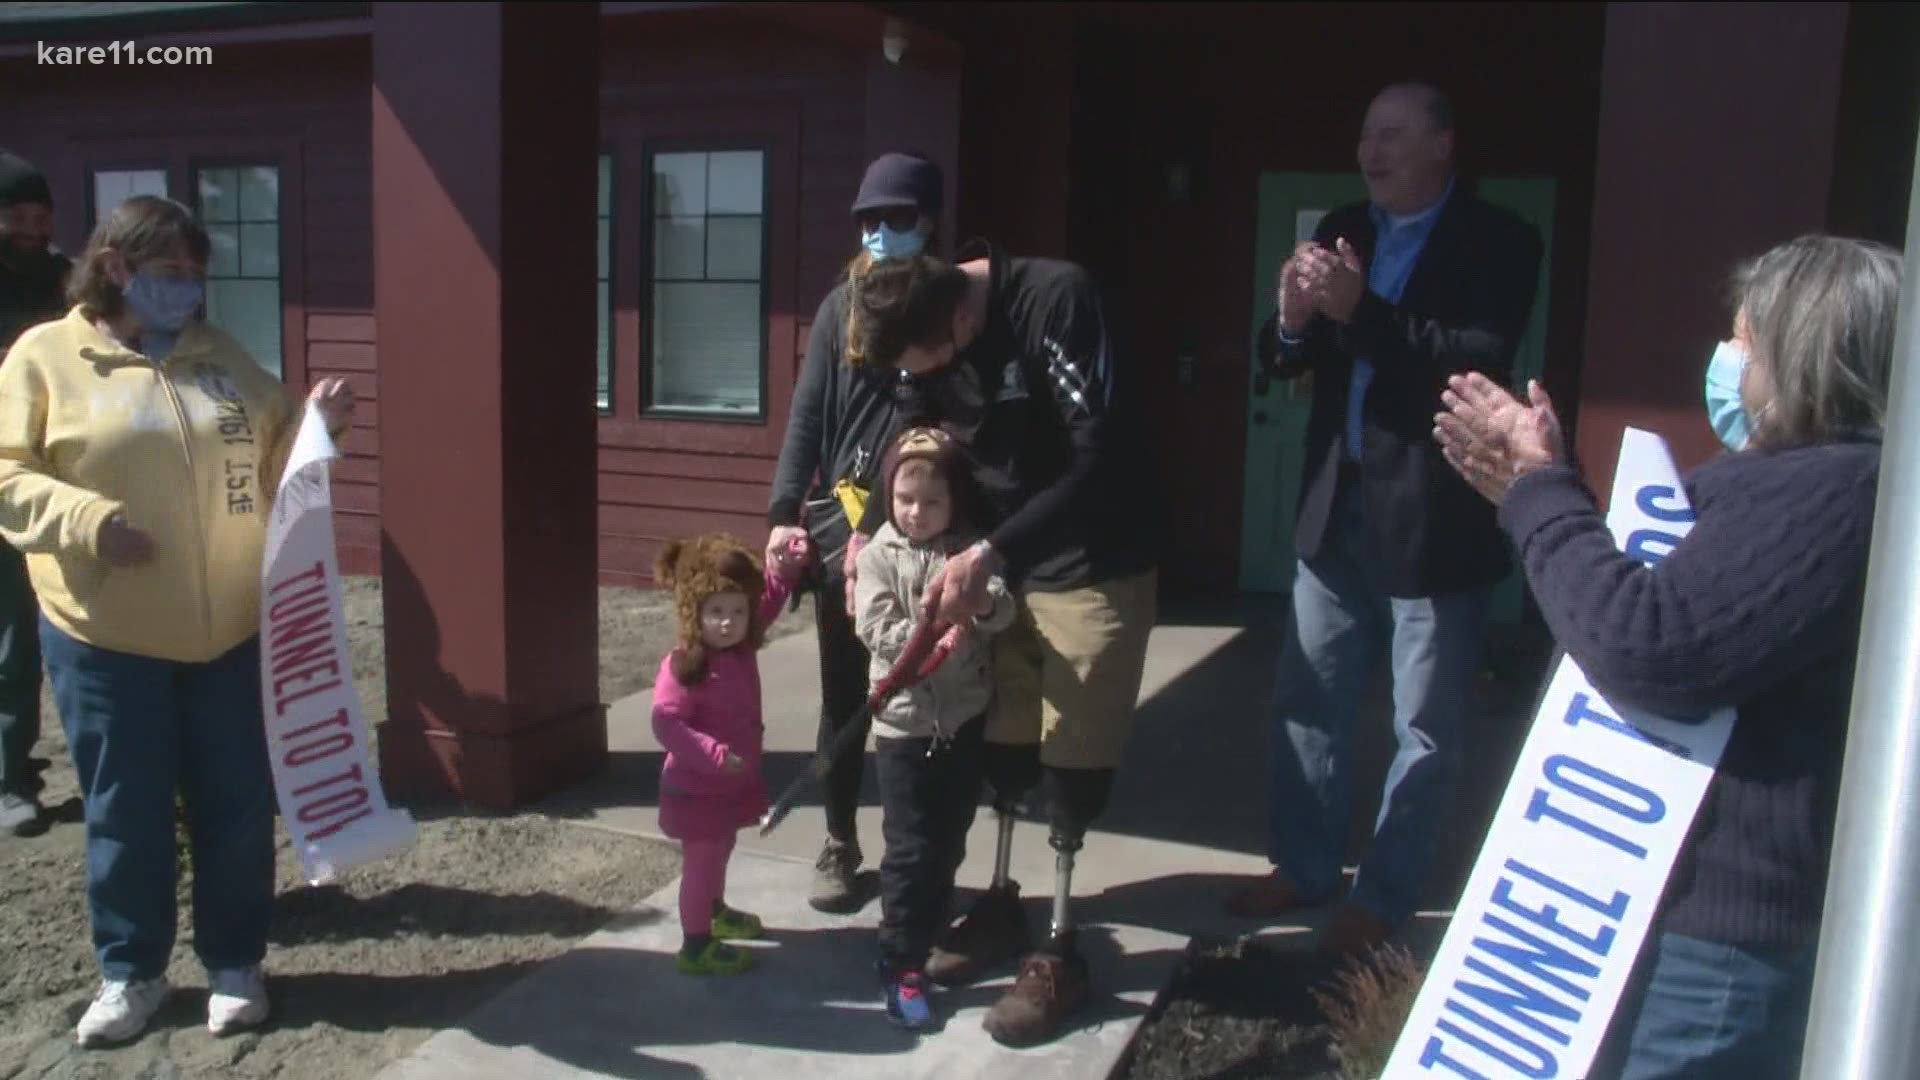 An army veteran who lost his legs while stationed in Afghanistan has a new home in Lake Elmo.